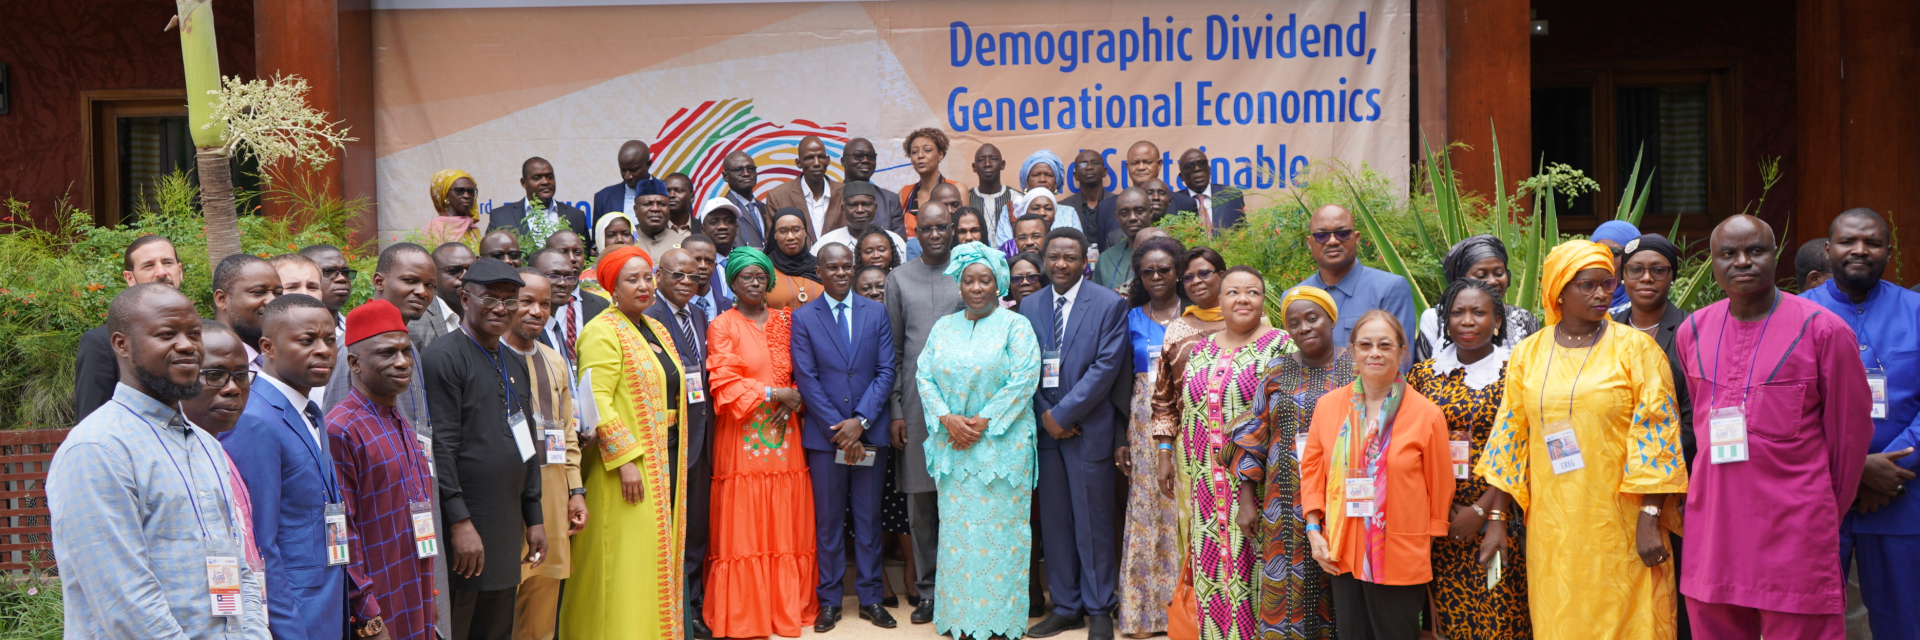 ECA in West Africa brings together policy-makers and researchers to discuss demographic dividend and sustainable development in Africa